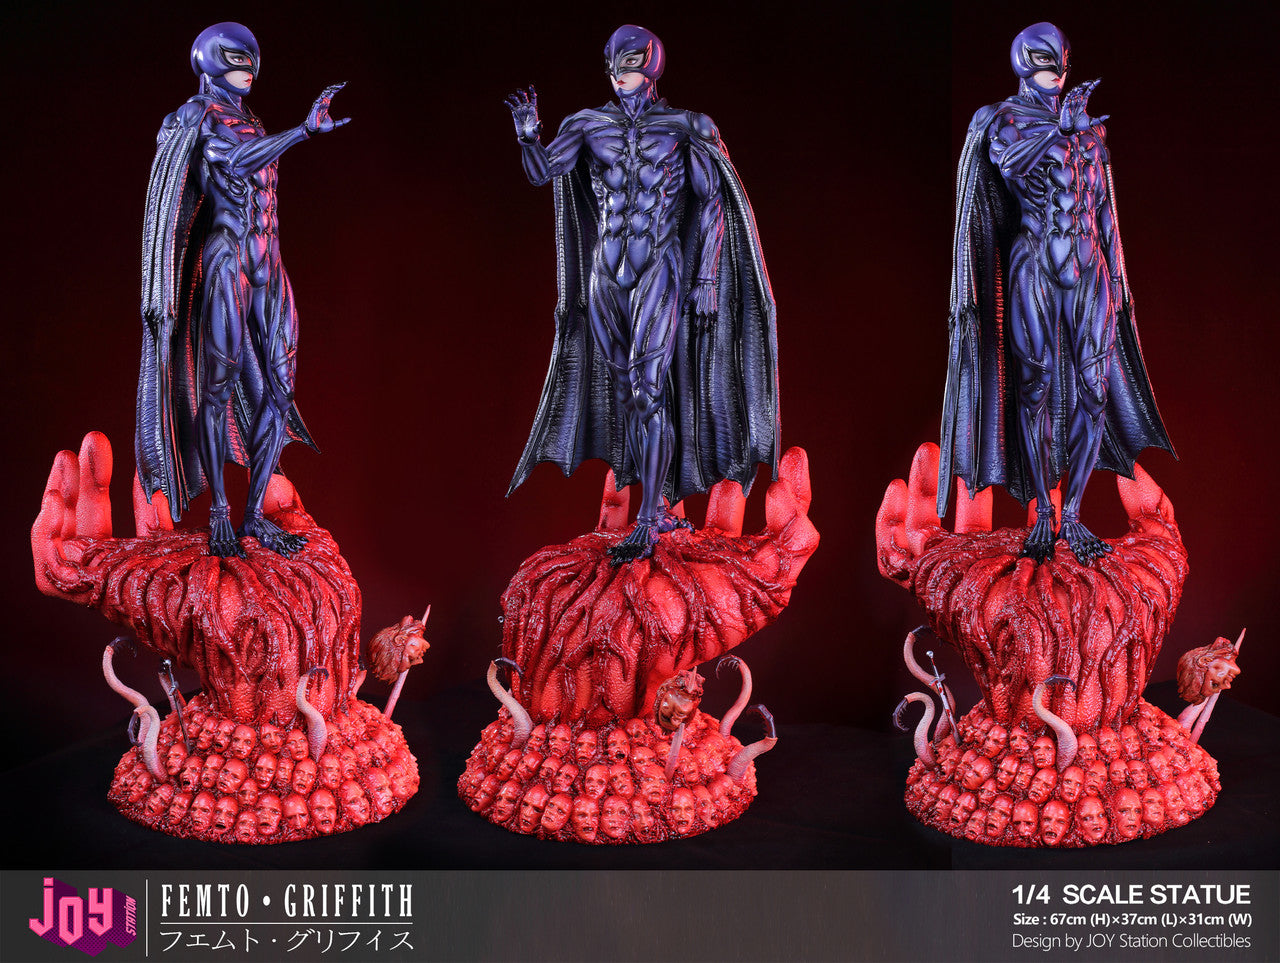 [PRE ORDER] Berserk - Joy Station Studio - Griffith Femto (Price does not include shipping - Please Read Description)